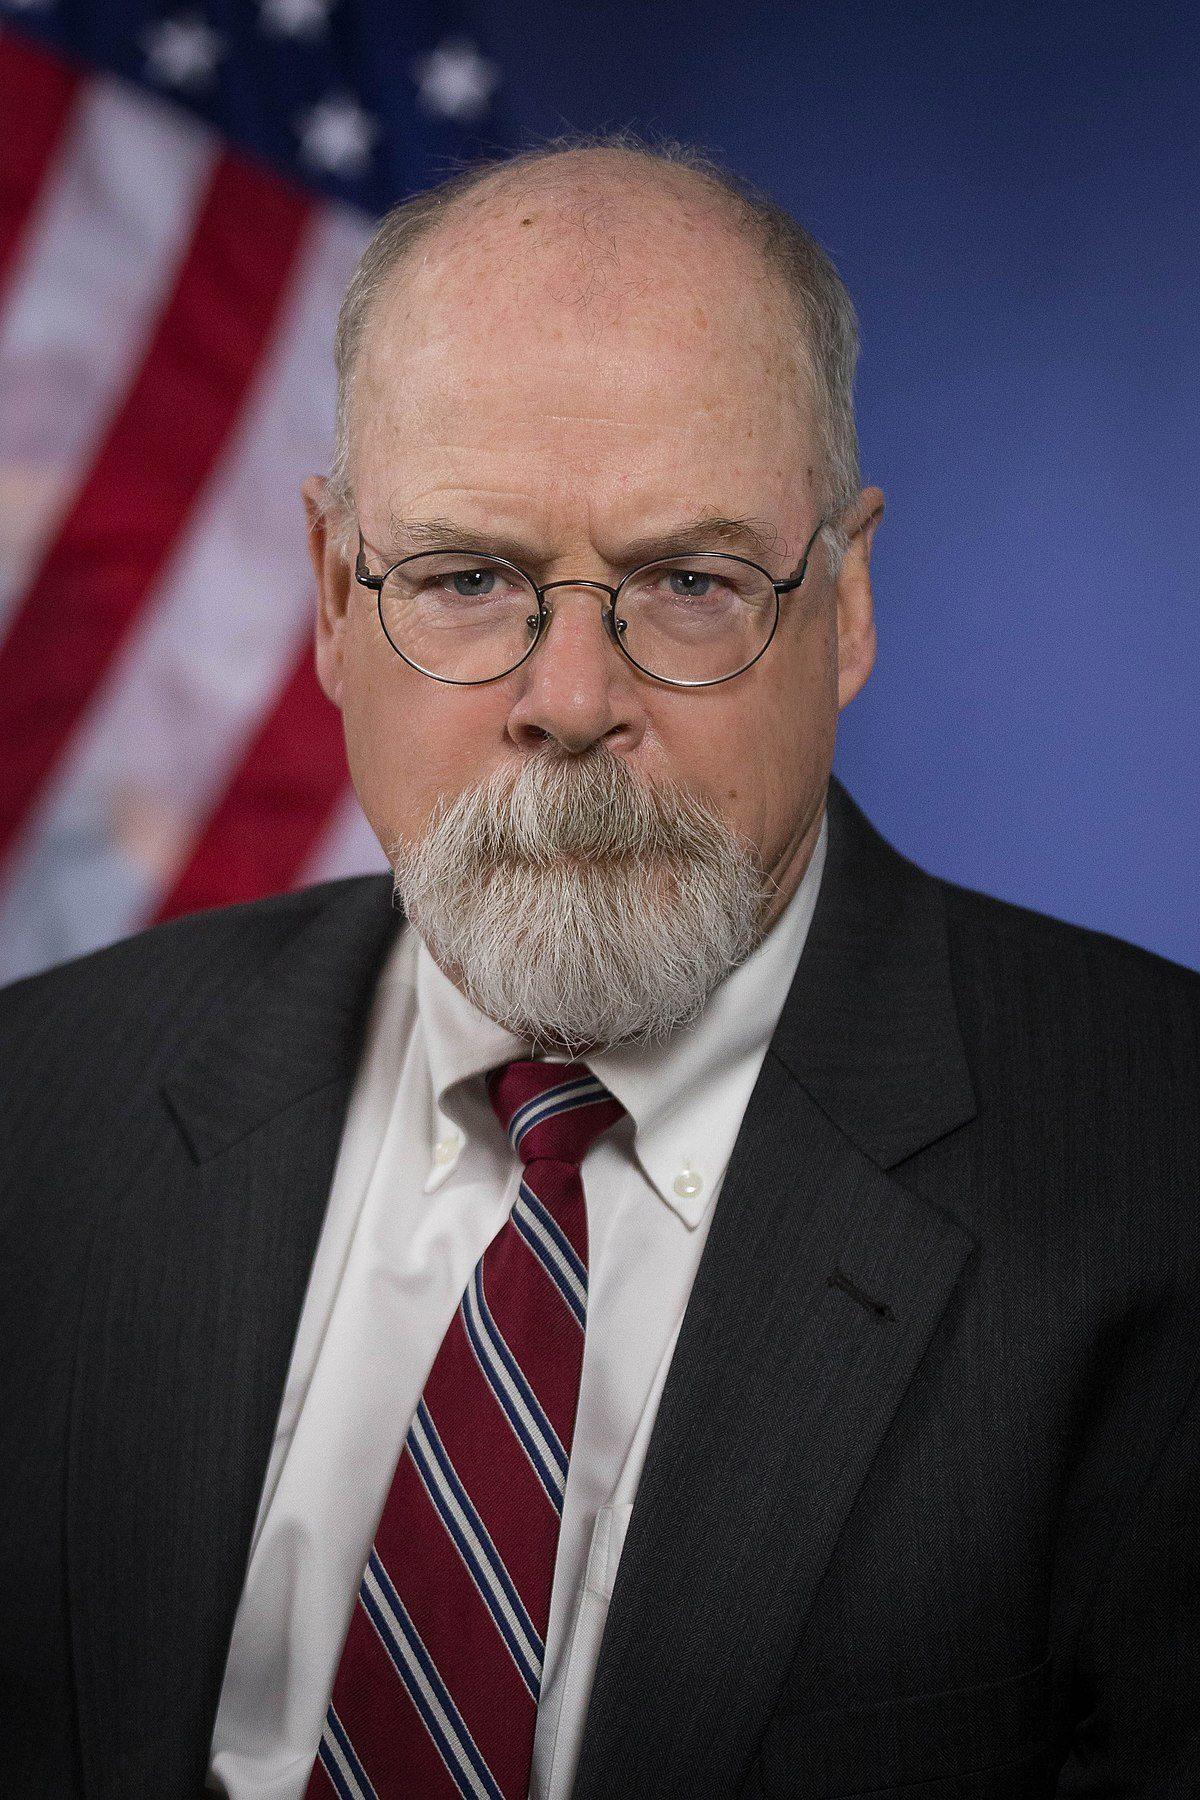 John Durham, then-U.S. Attorney for the District of Connecticut. (United States Department of Justice)